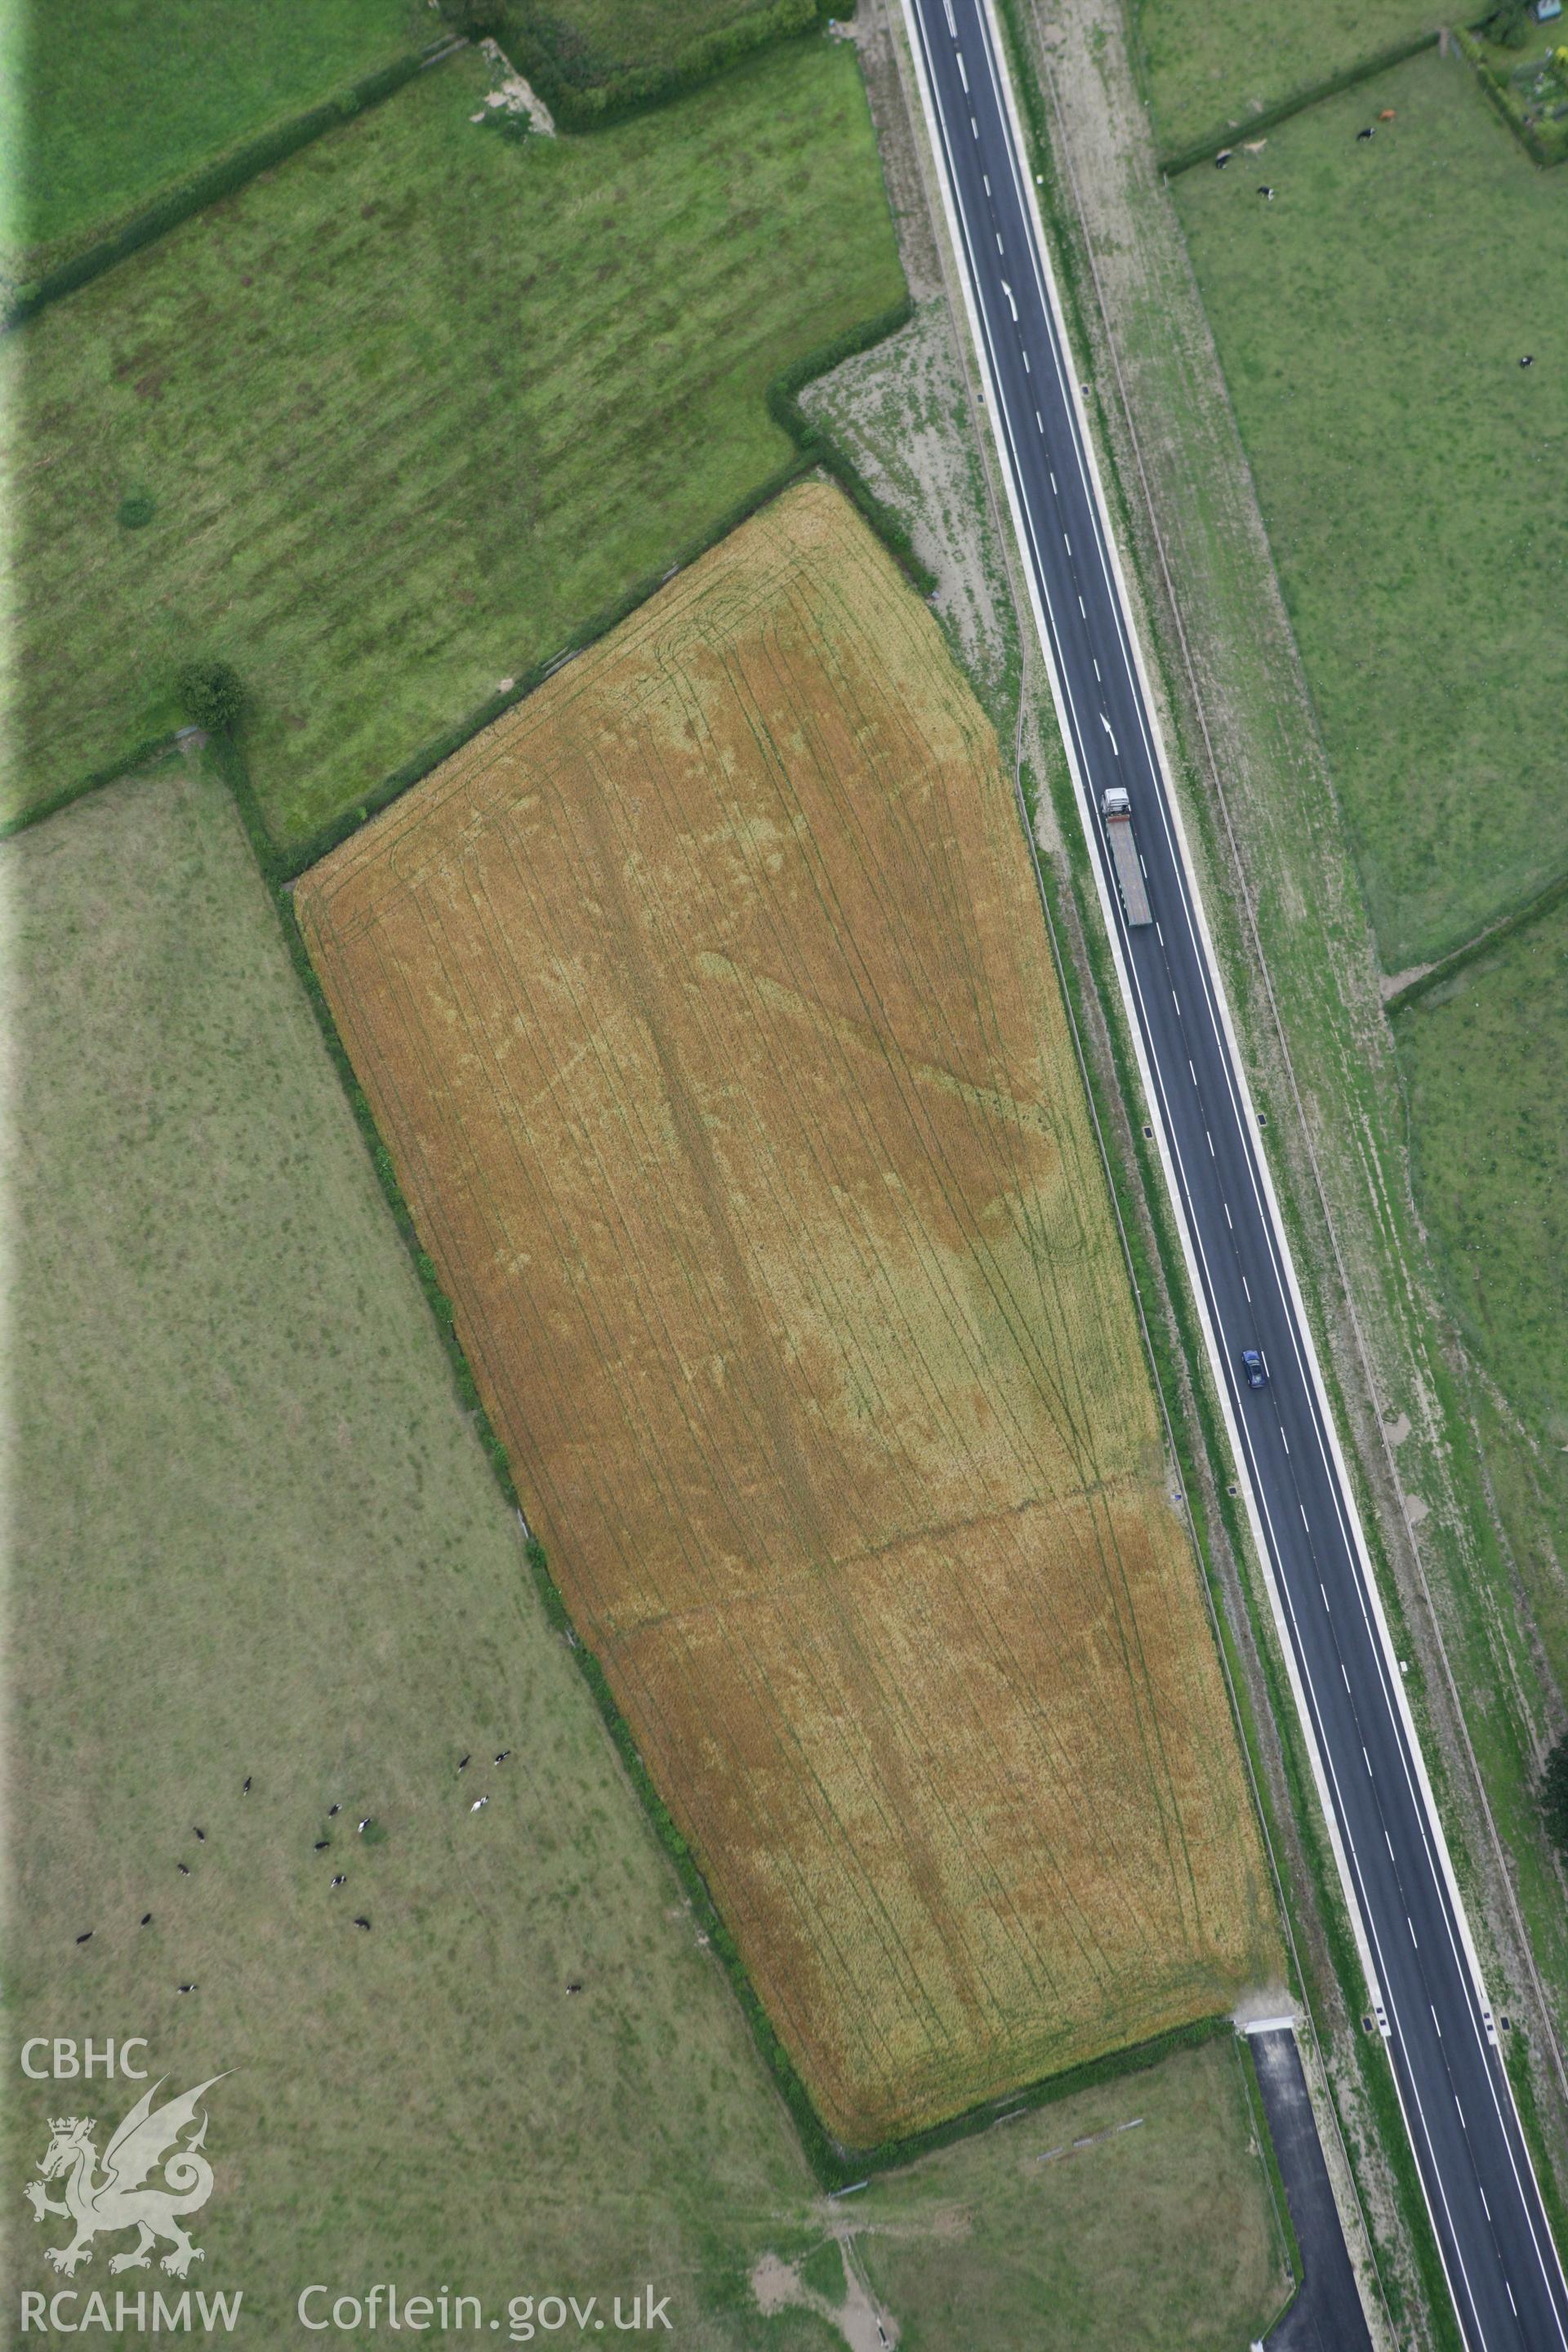 RCAHMW colour oblique photograph of Four Crosses bypass, cropmark of ditch. Taken by Toby Driver on 20/07/2011.